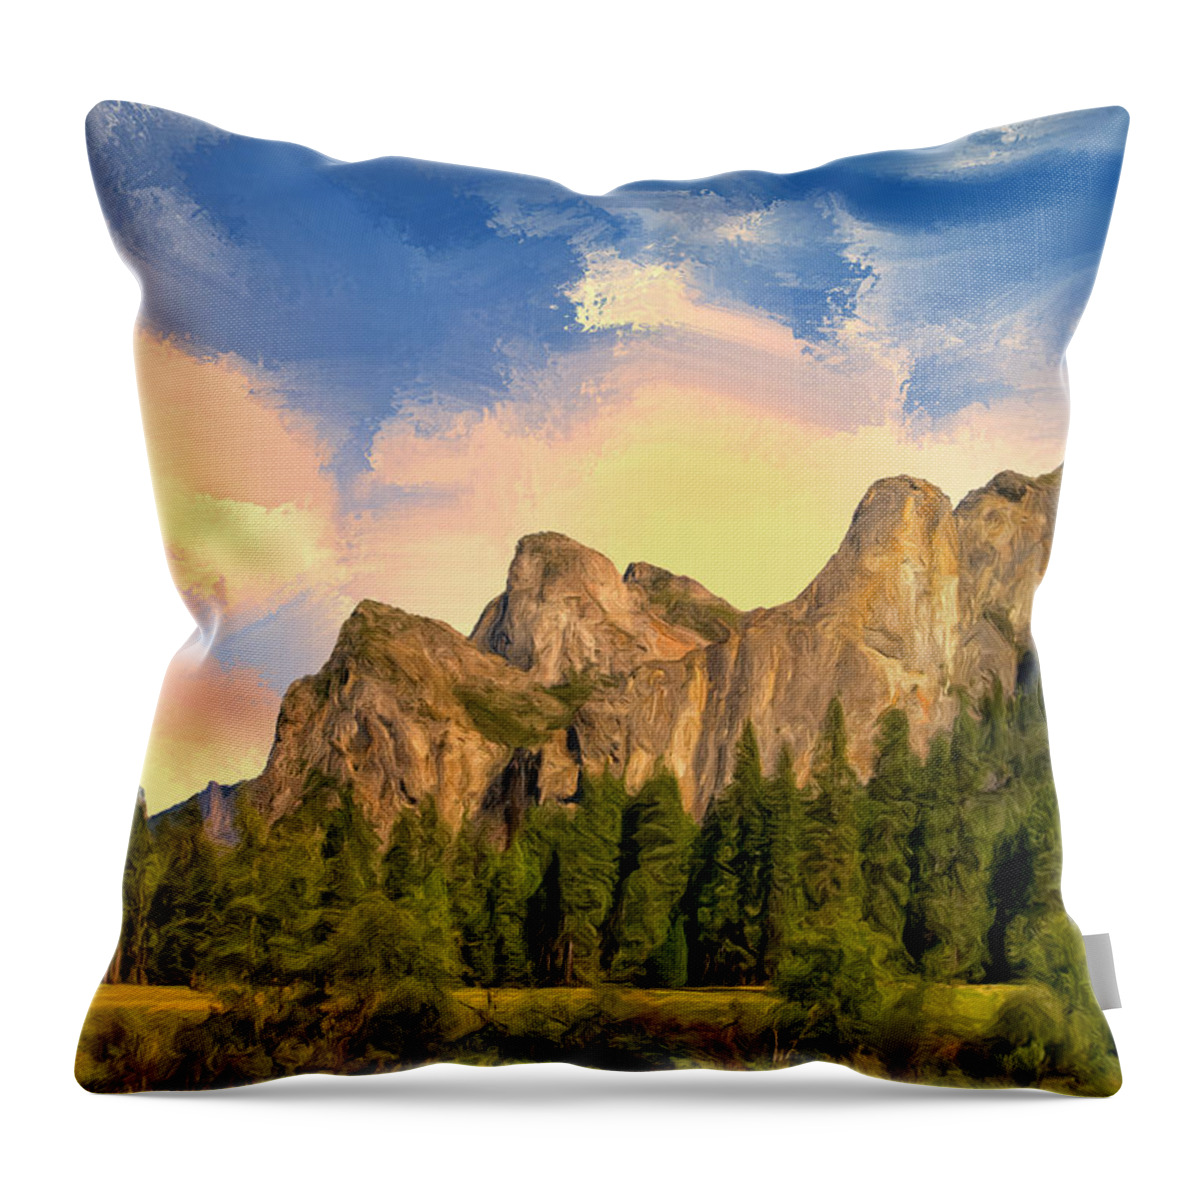 Yosemite Throw Pillow featuring the painting Yosemite Valley Morning by Dominic Piperata